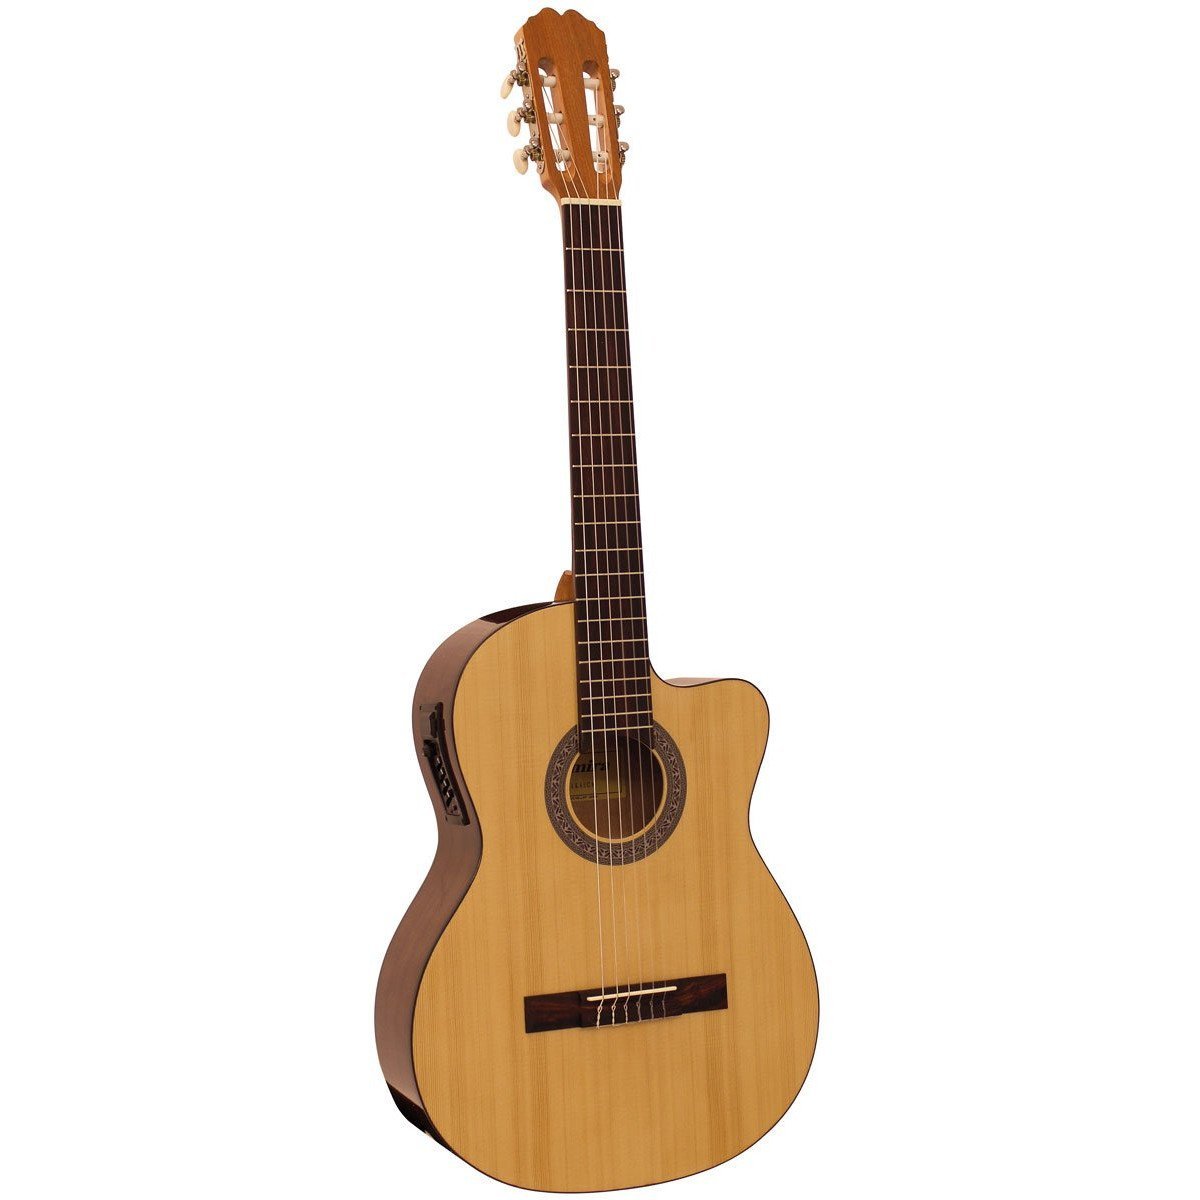 How to choose the best classical guitar